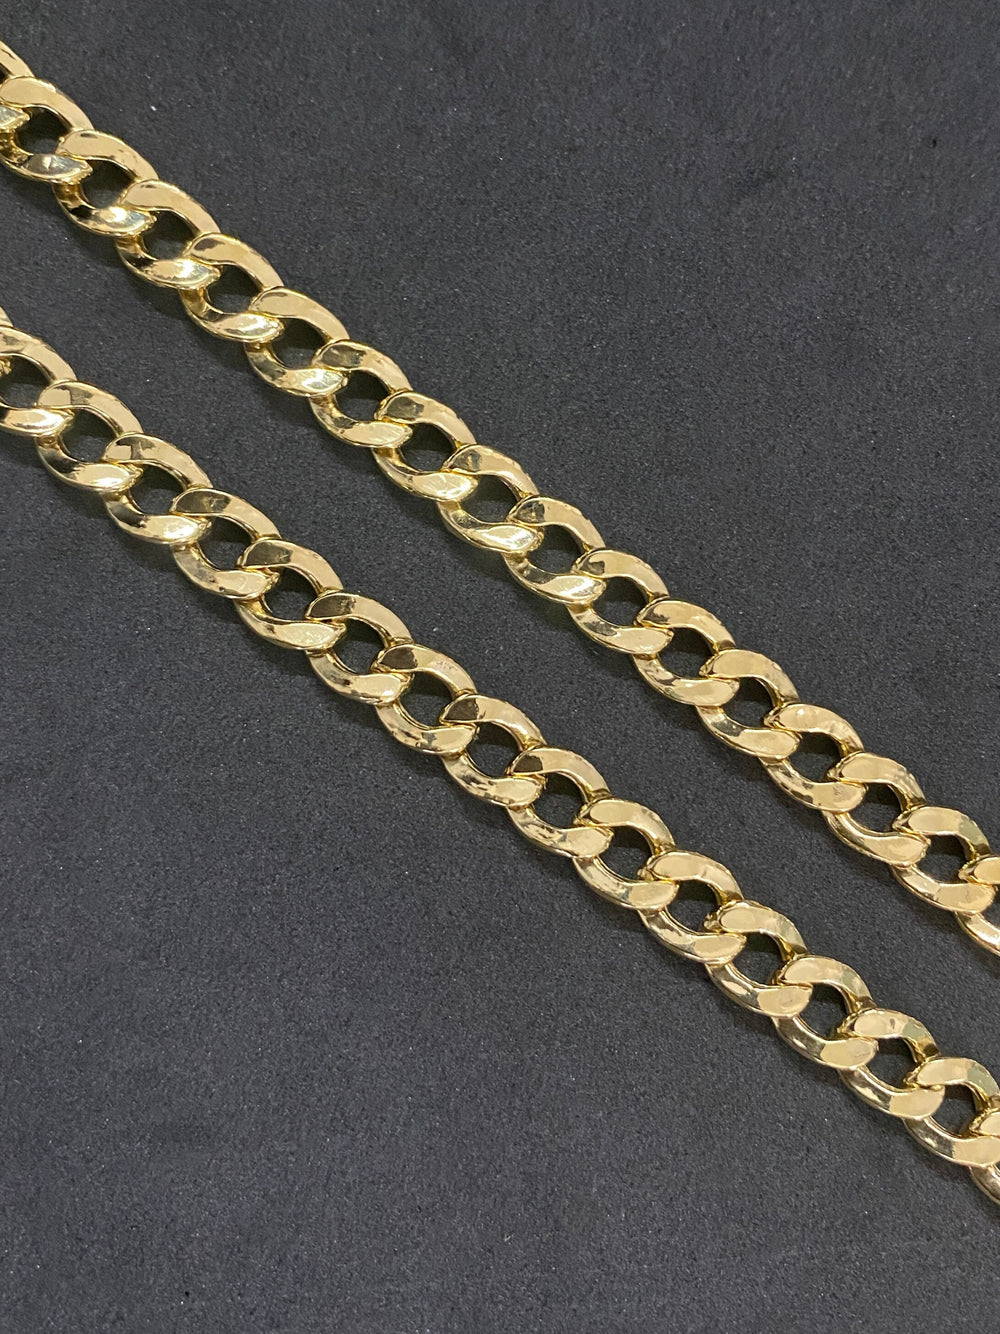 7mm Solid 10K Yellow Gold .925 Sterling Silver Miami Curb Link Chain 7mm 22"-26"